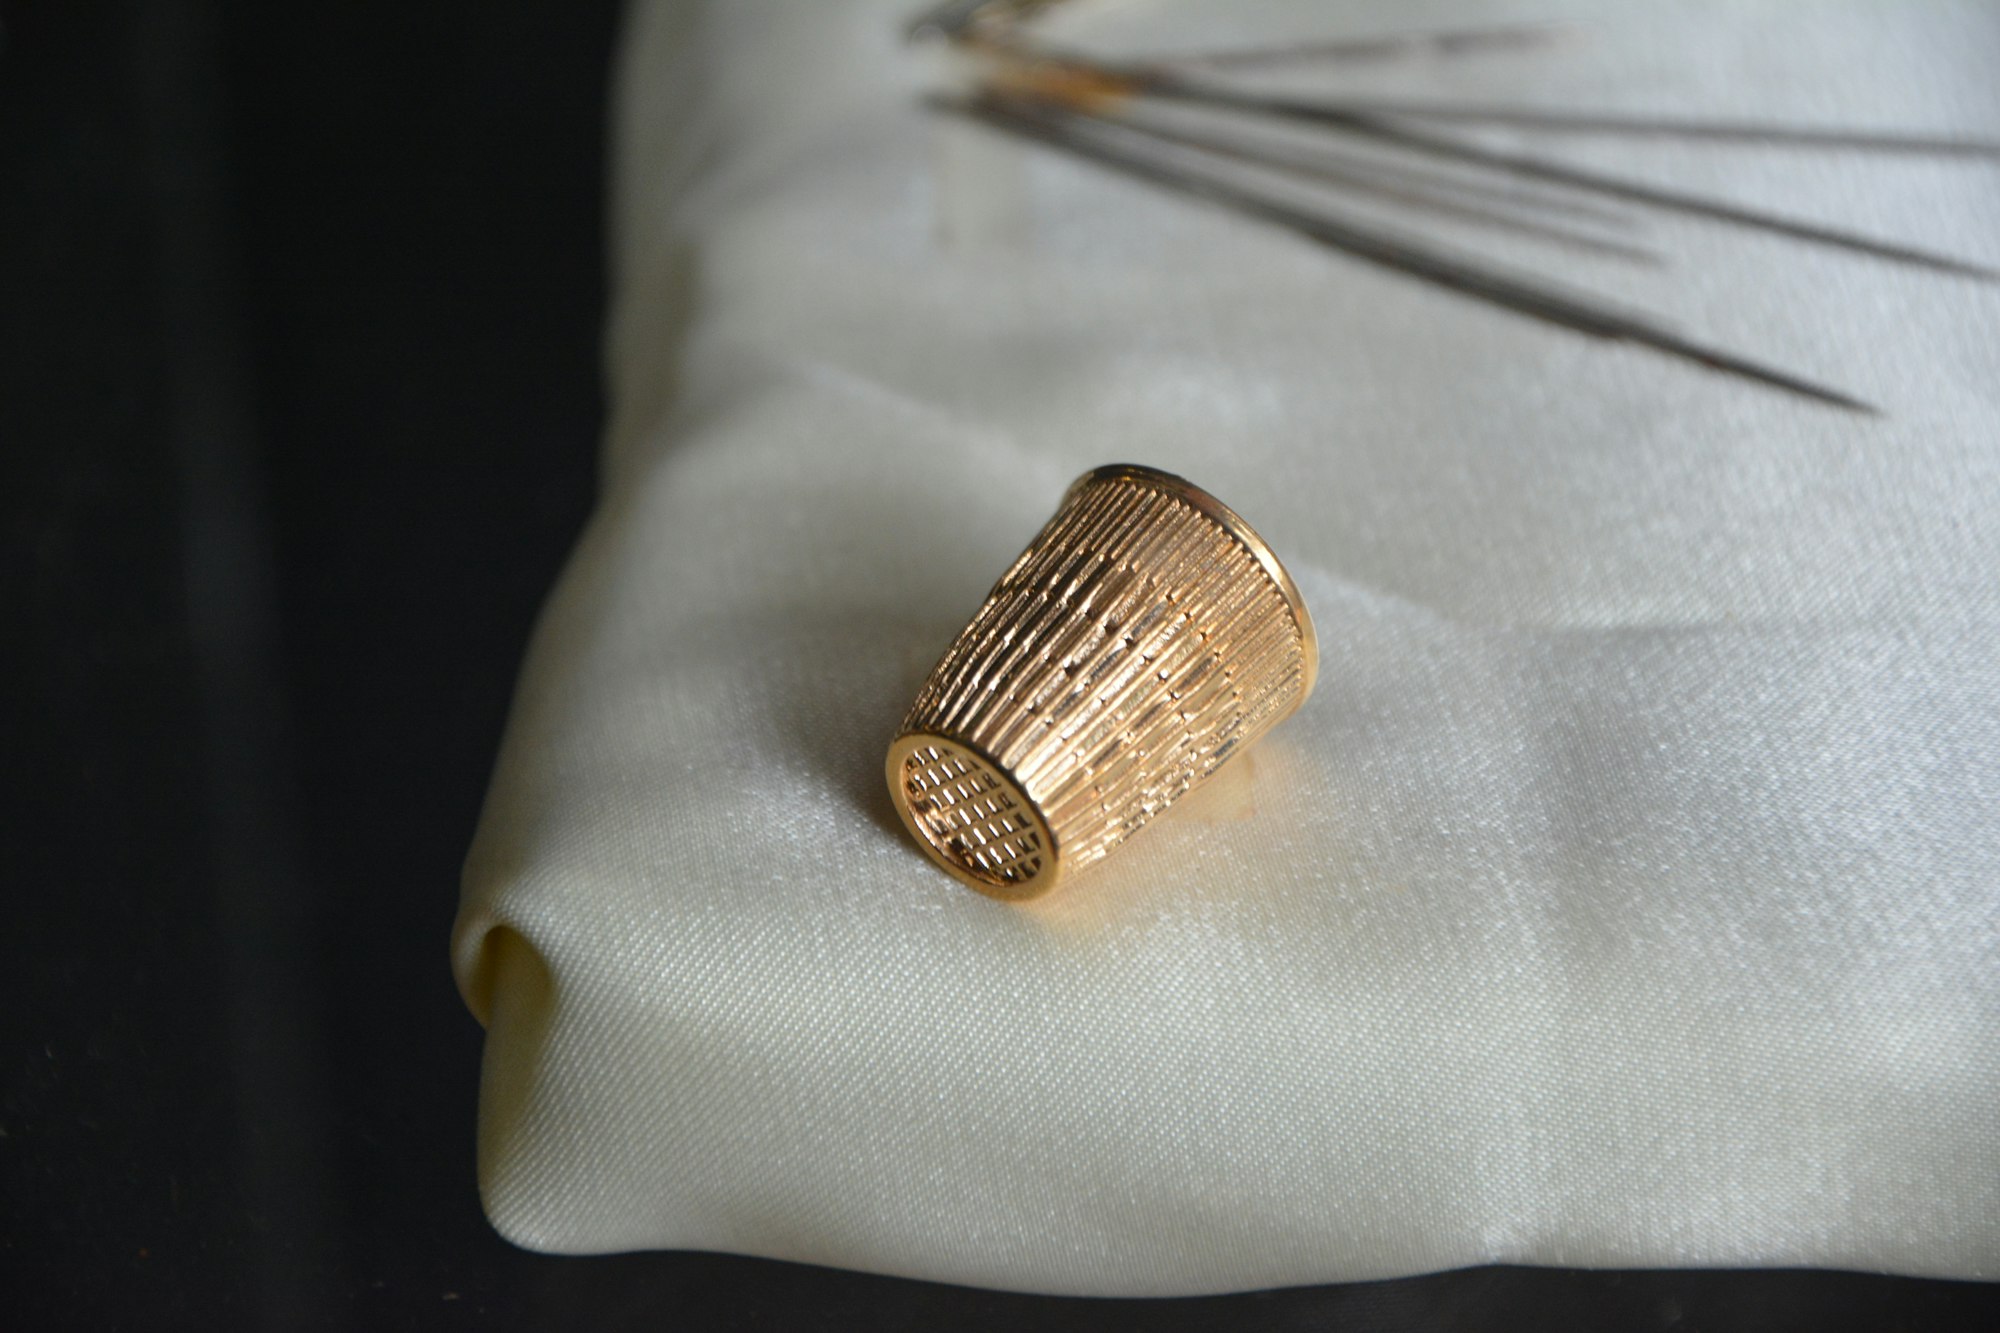 A golden metal thimble that is meant to be worn on the first joint of a finger.